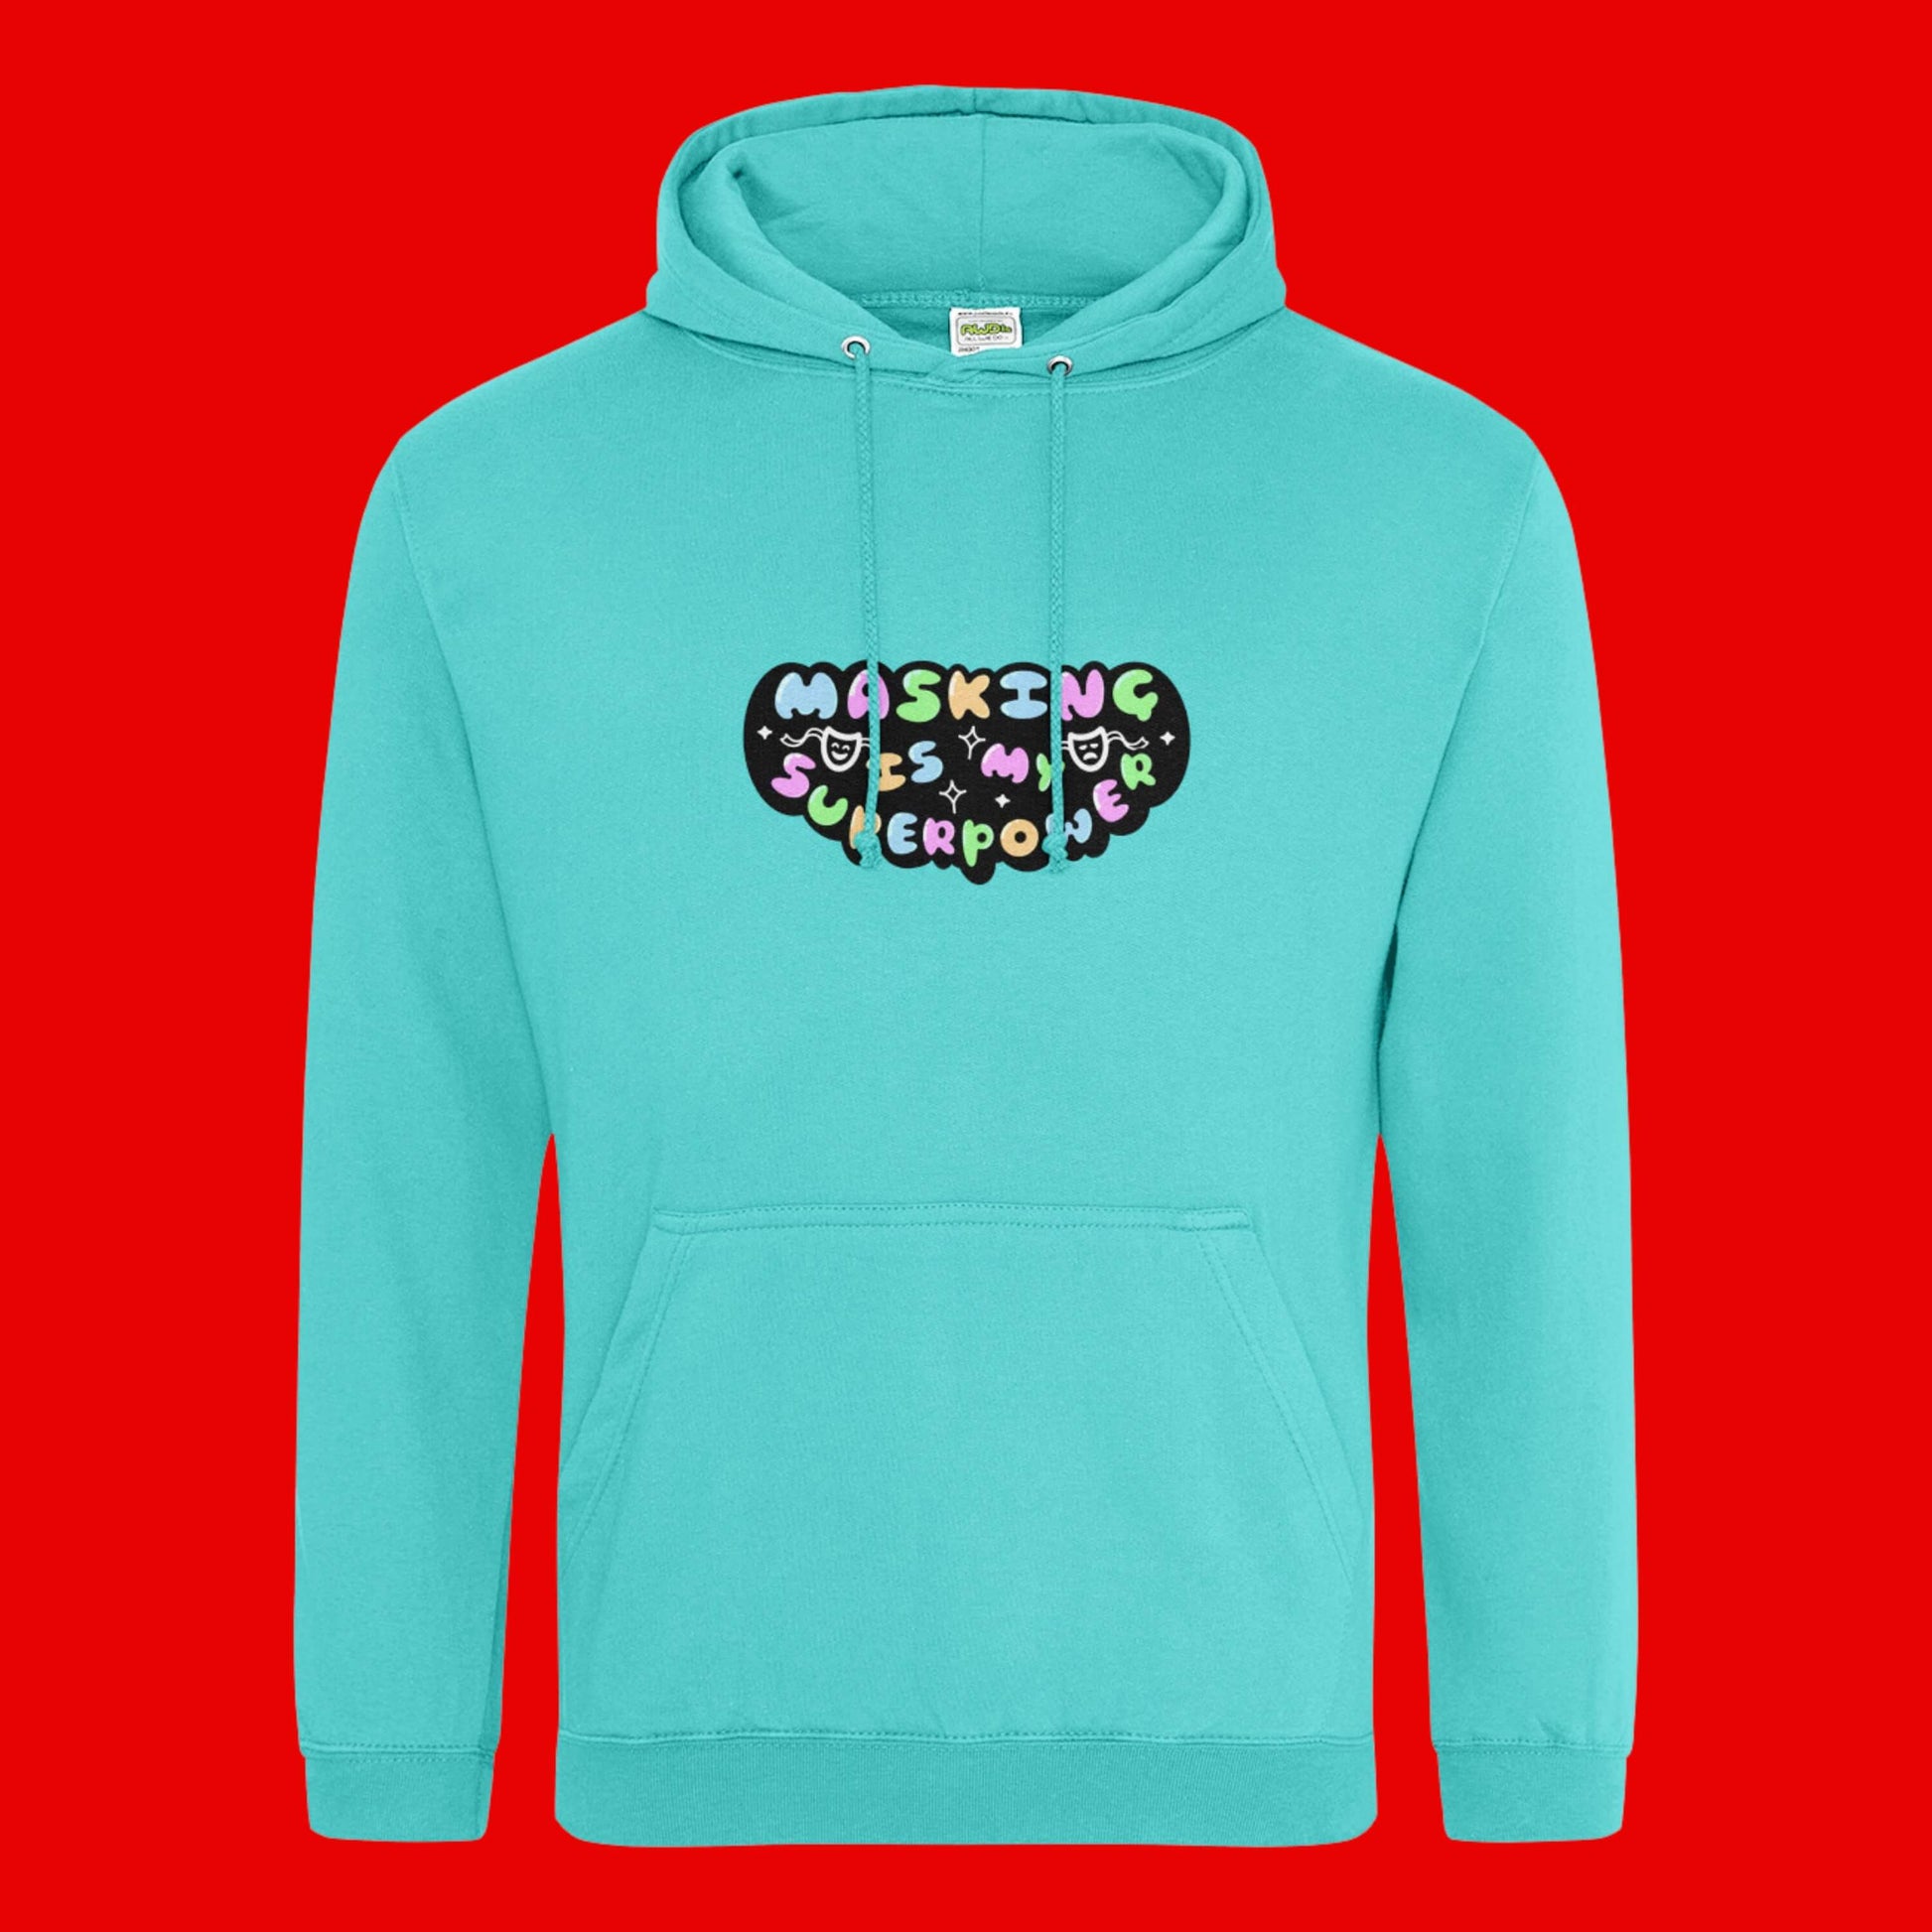 The turquoise surf Masking Is My Super Power Hoodie on a red background. The aqua blue hoodie features pastel rainbow bubble writing that reads 'masking is my superpower' with white sparkles, a happy and sad drama masks all on a black oval. Raising awareness for neurodivergent people with ADHD or Autism.